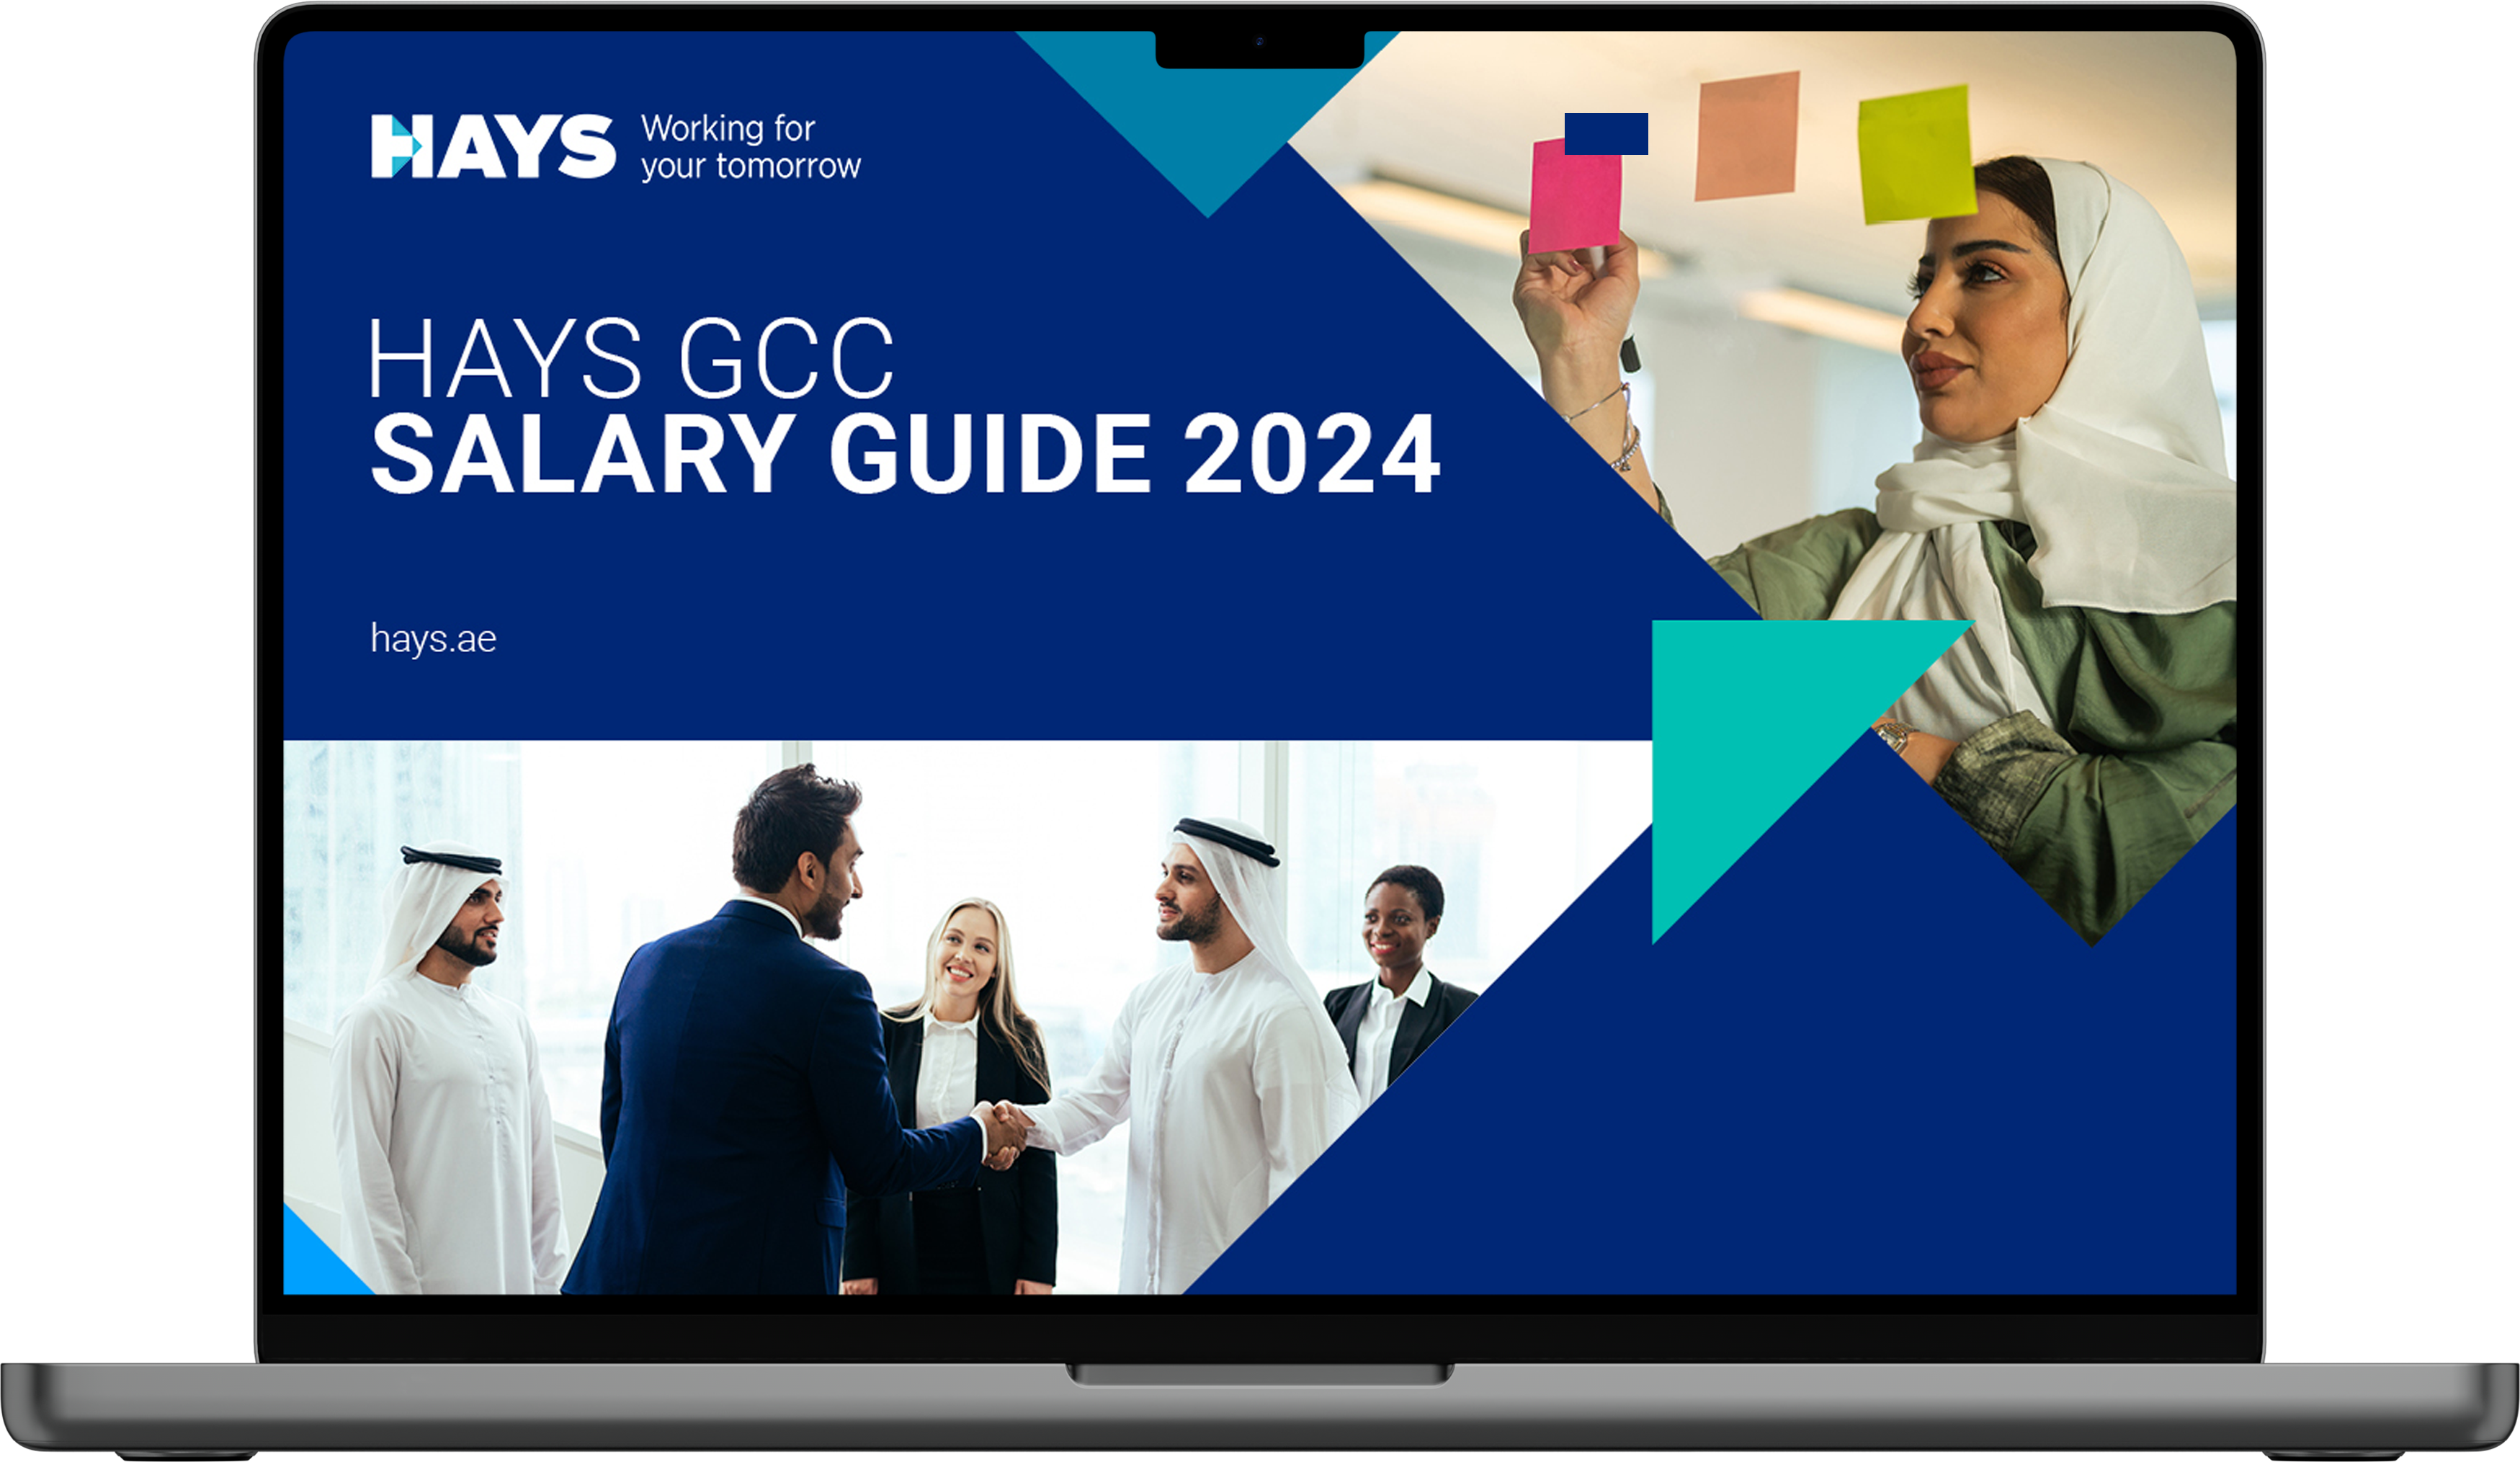 Hays Poland Salary Guide Front Cover